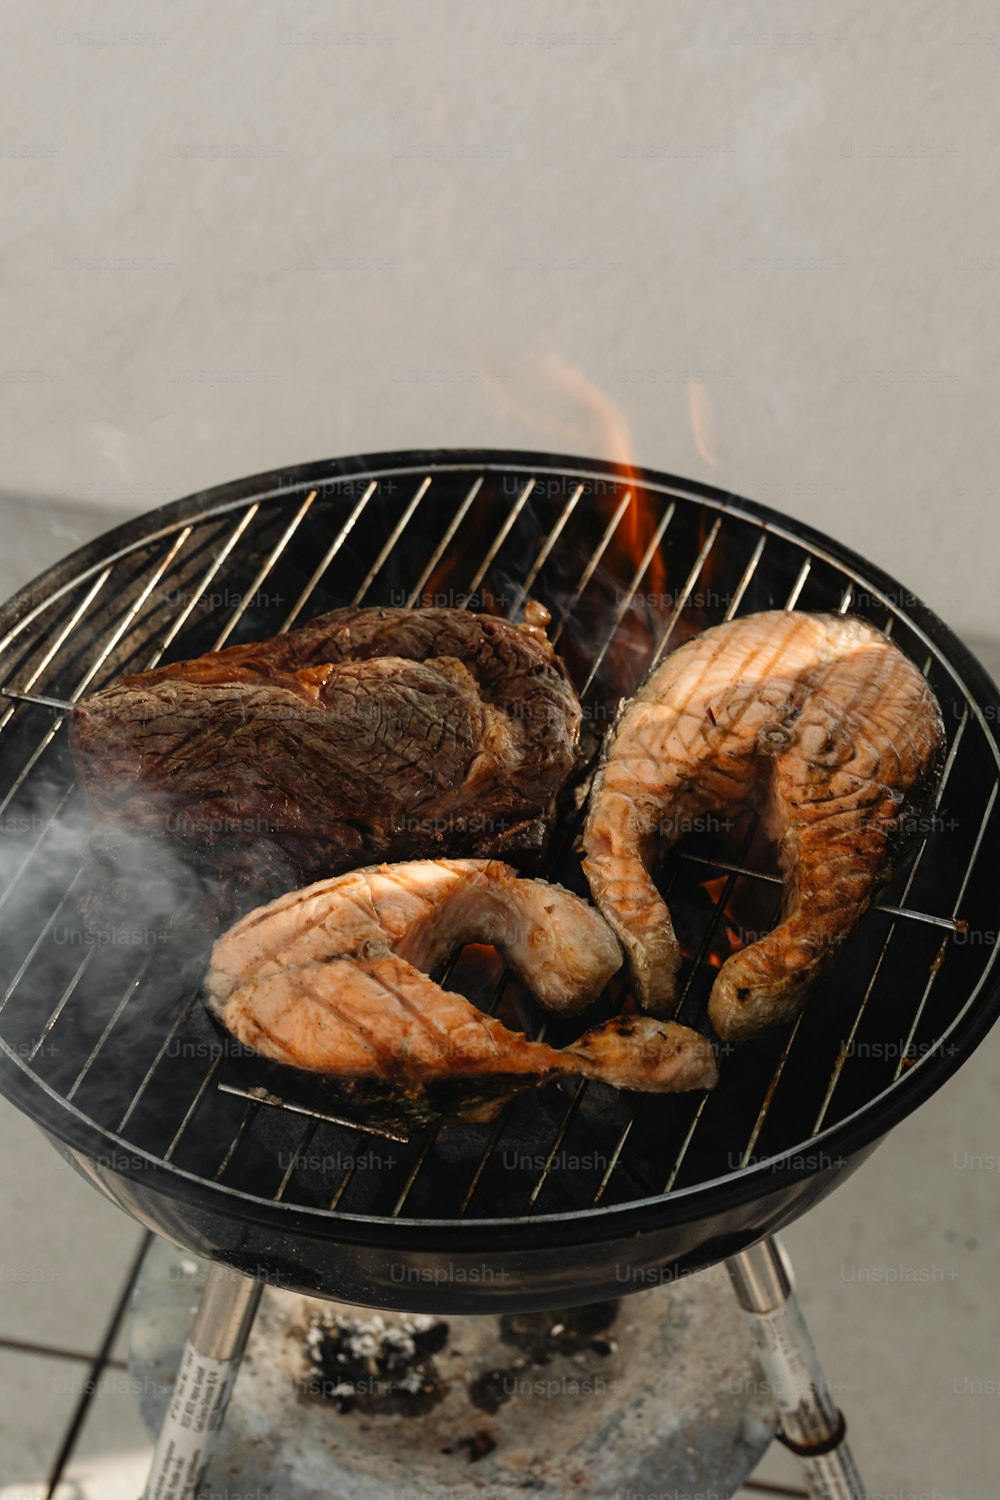 a bbq grill with meat and vegetables cooking on it